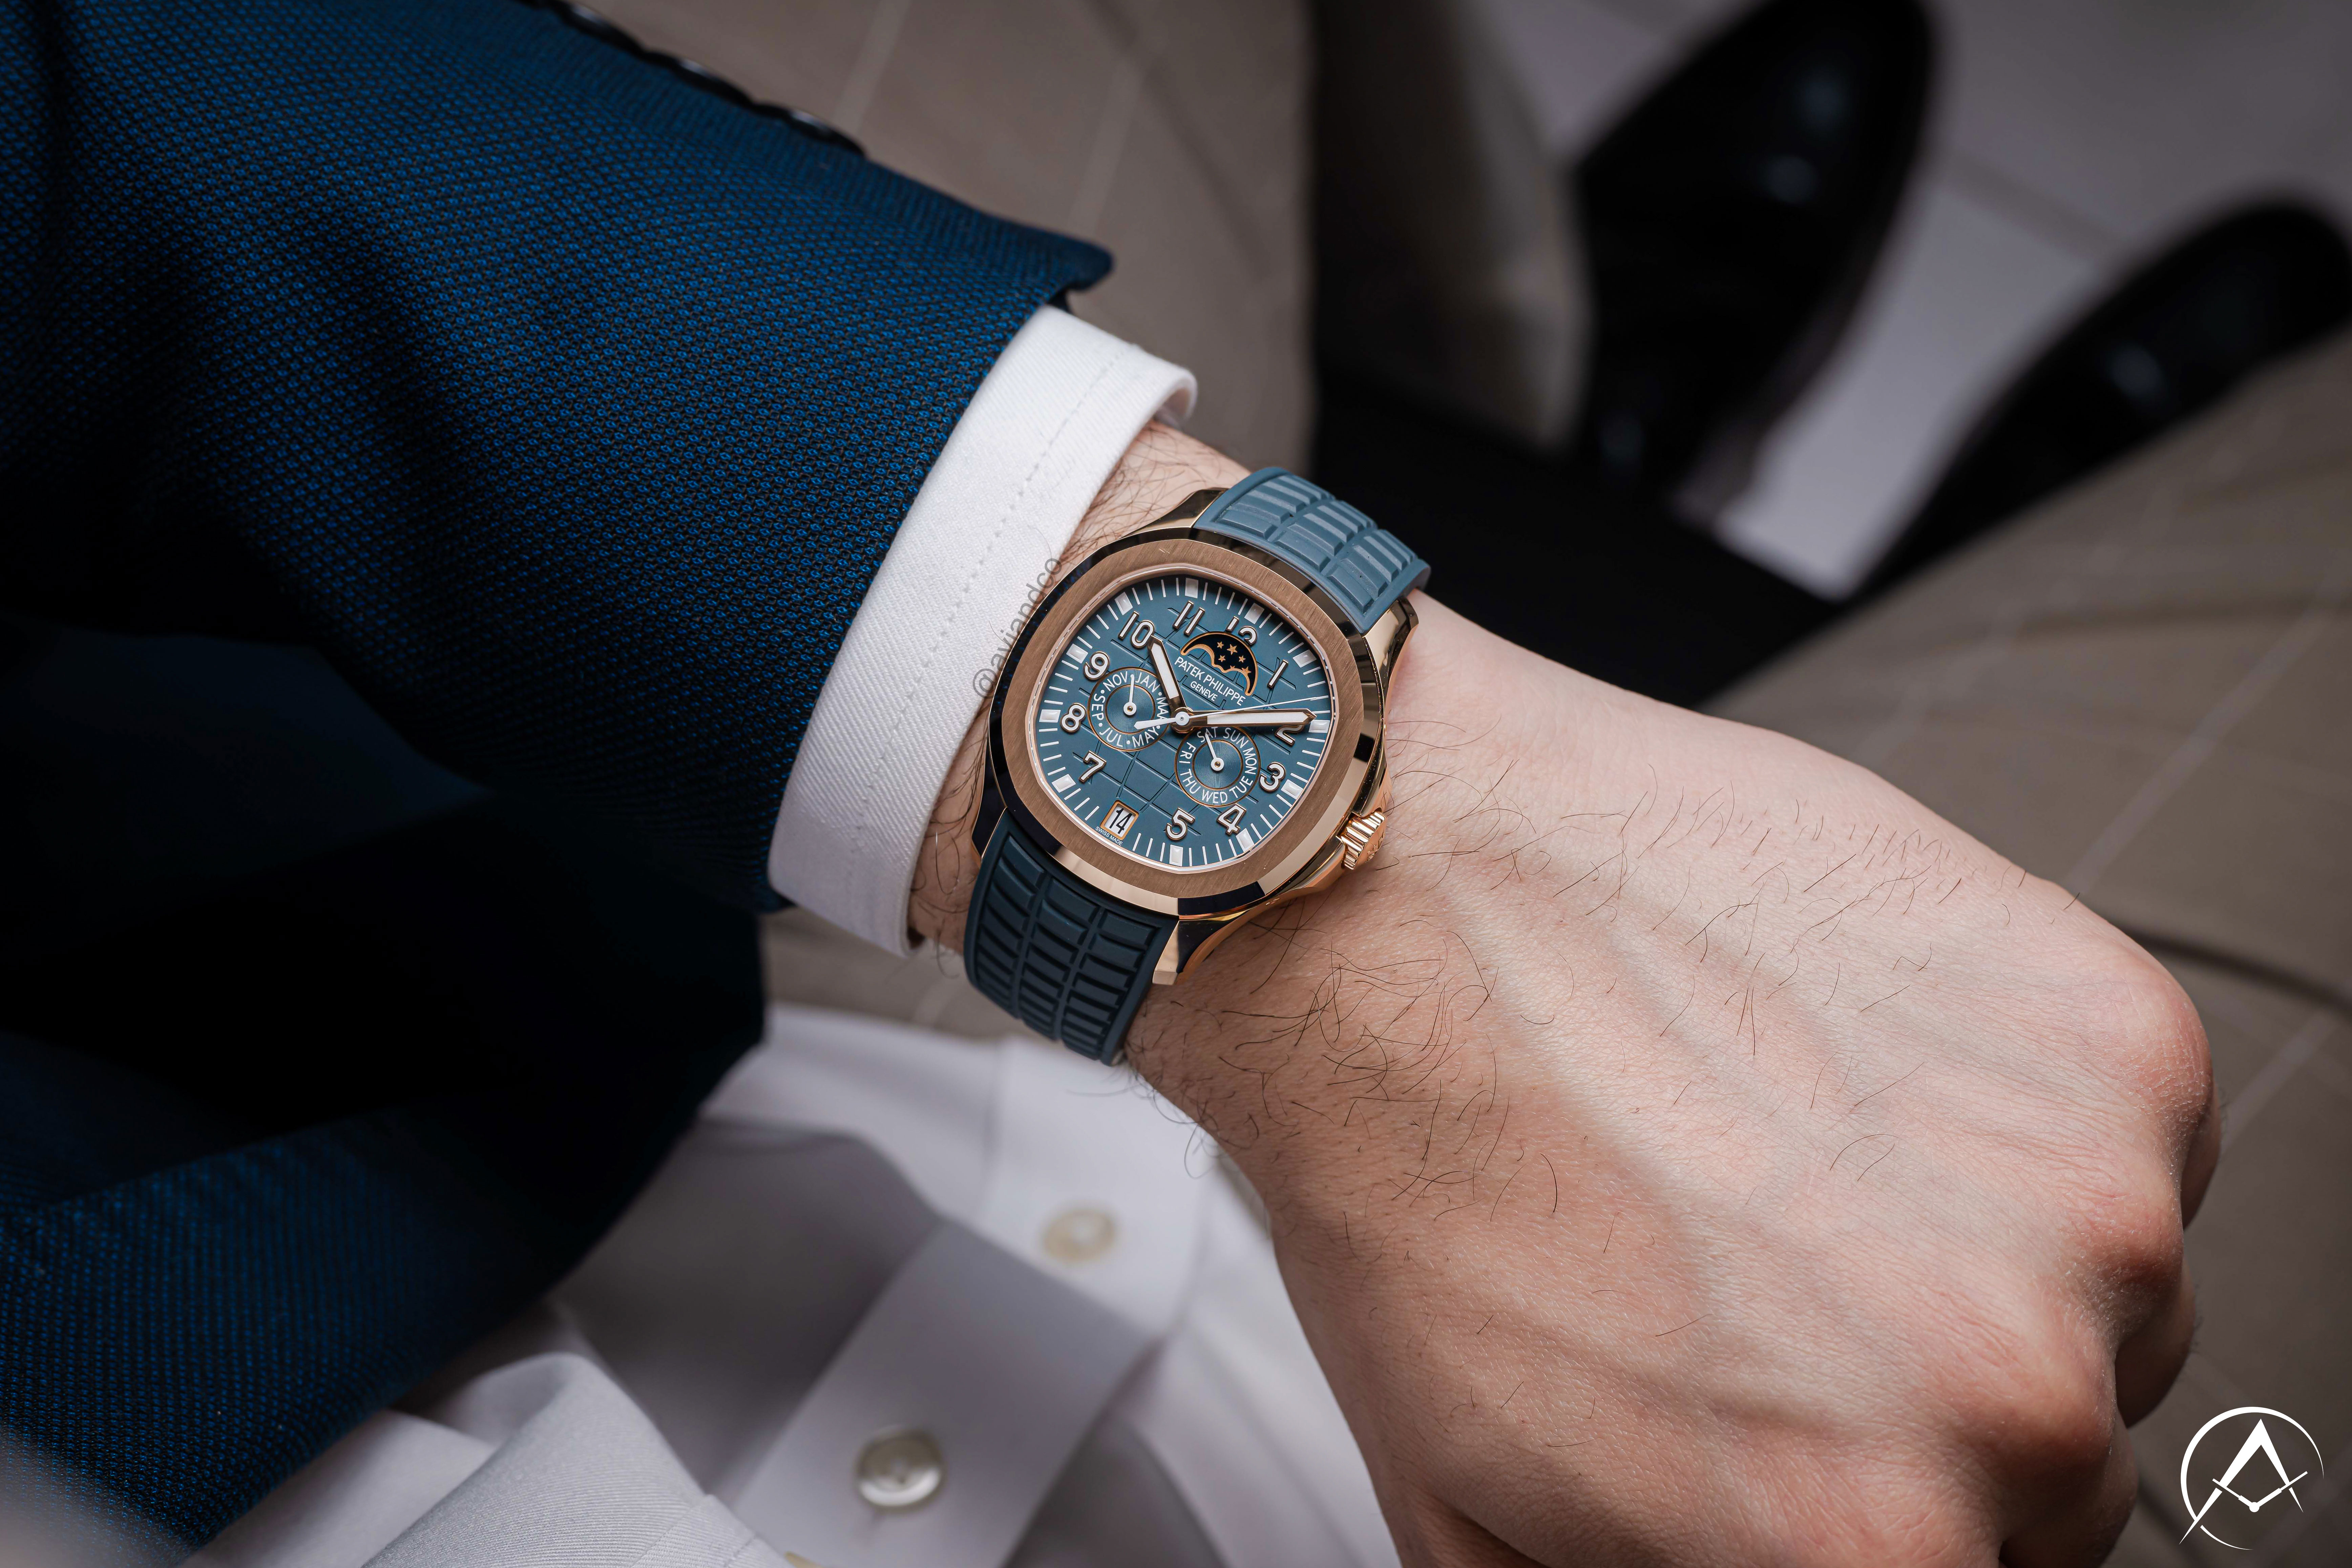 18K Rose Gold Luxury Timepiece with Blue Dial, Arabic Numerals, Navy Blue Rubber Strap, and Annual Calendar Displayed on a Man’s Wrist.